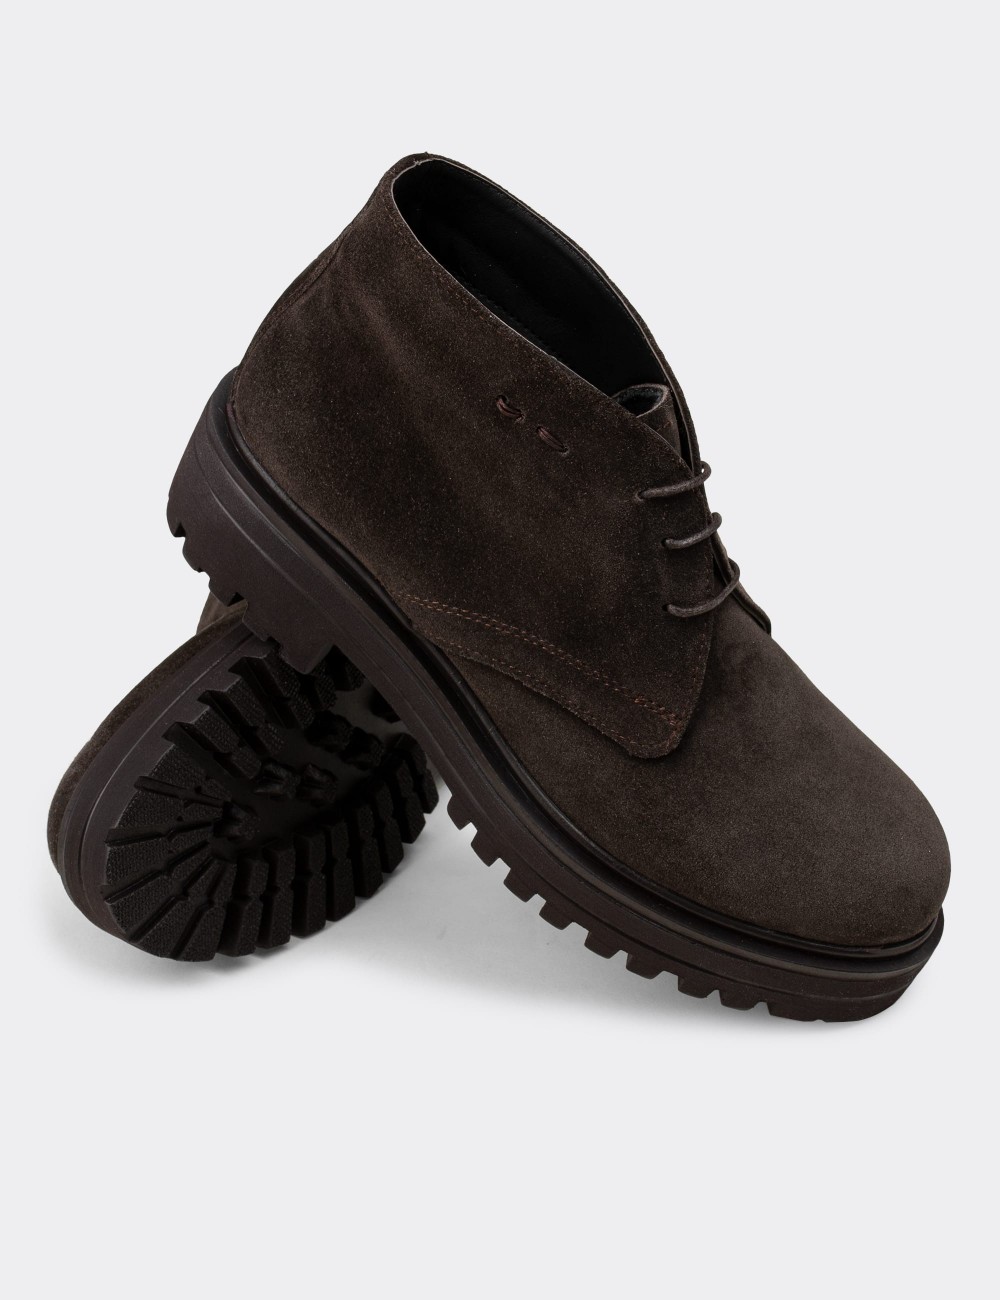 Brown Suede Leather Desert Boots - 01847ZKHVE02